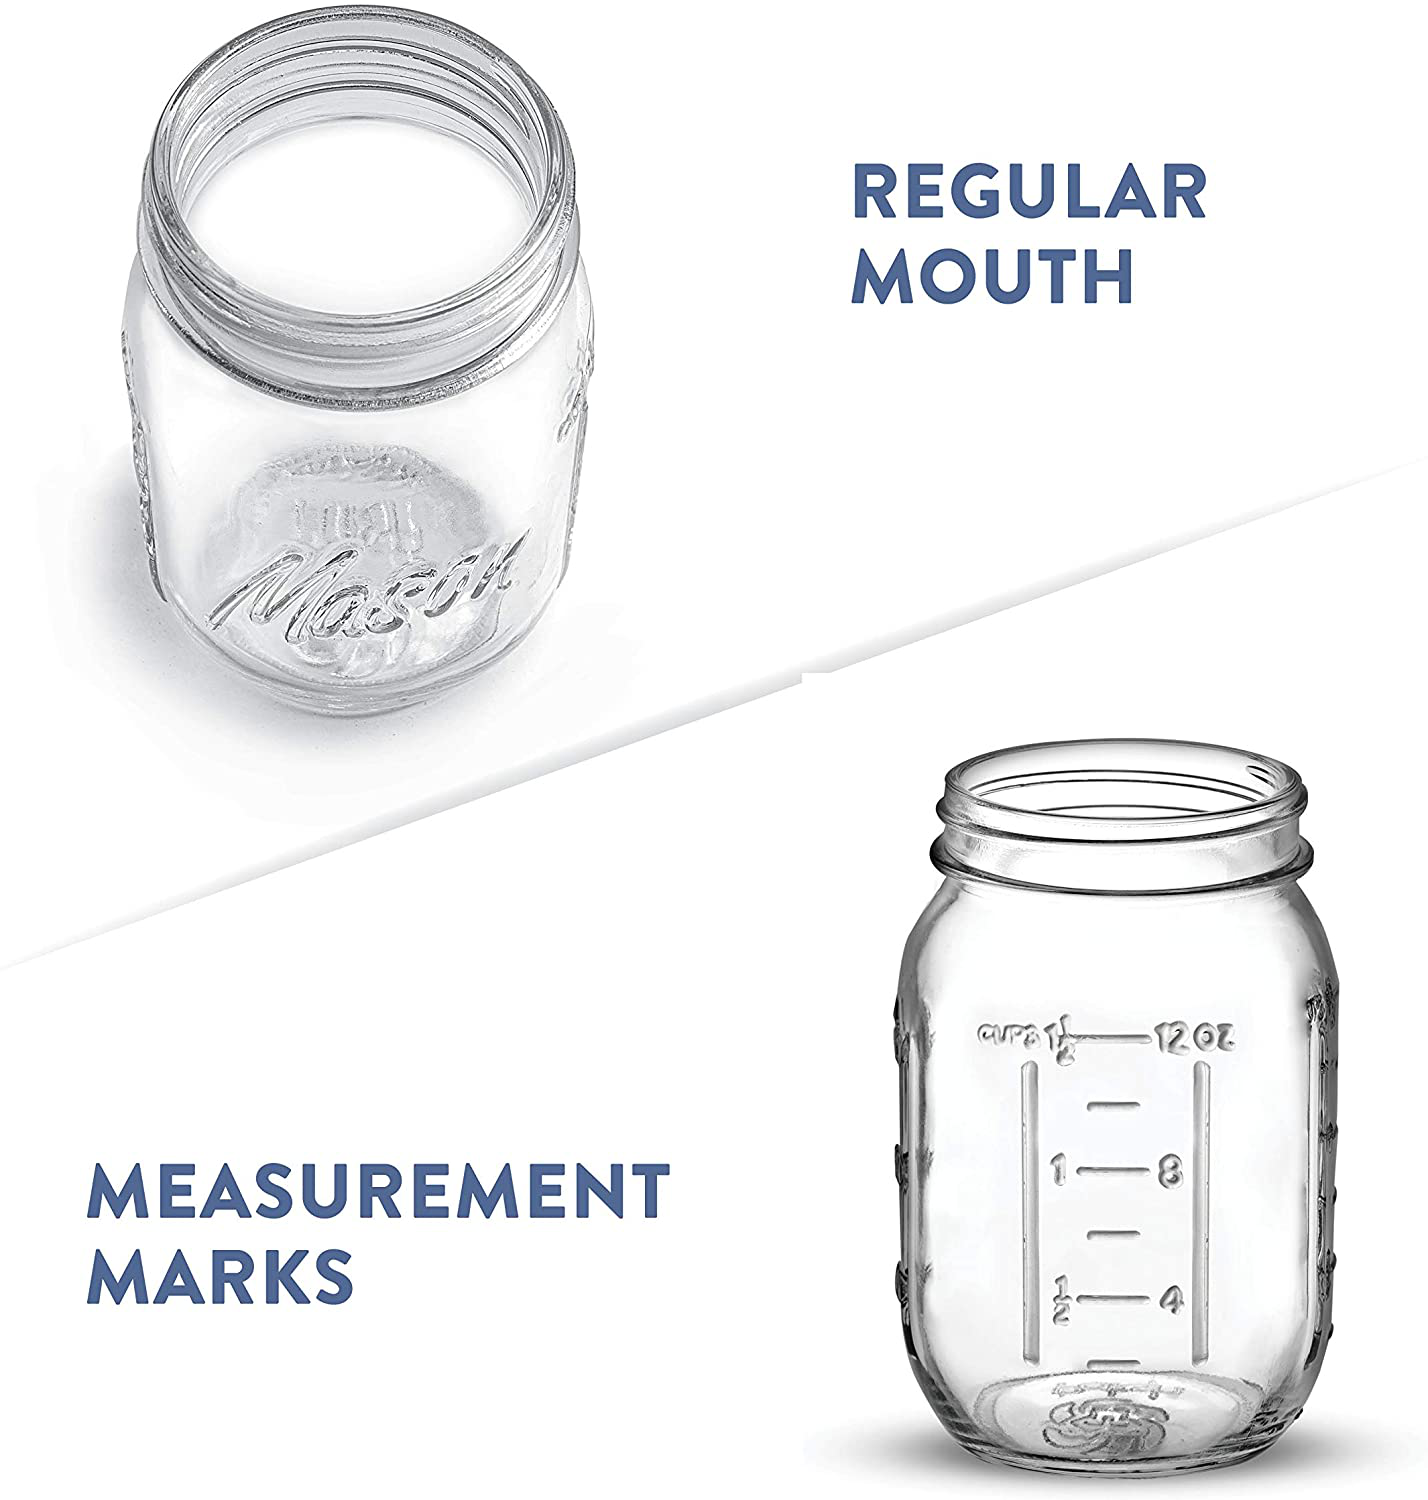 Regular-Mouth Glass Mason Jars, 16-Ounce (12-Pack) Glass Canning Jars with Silver Metal Airtight Lids and Bands with Measurement Marks, for Canning, Preserving, Meal Prep, Overnight Oats, Jam, Jelly